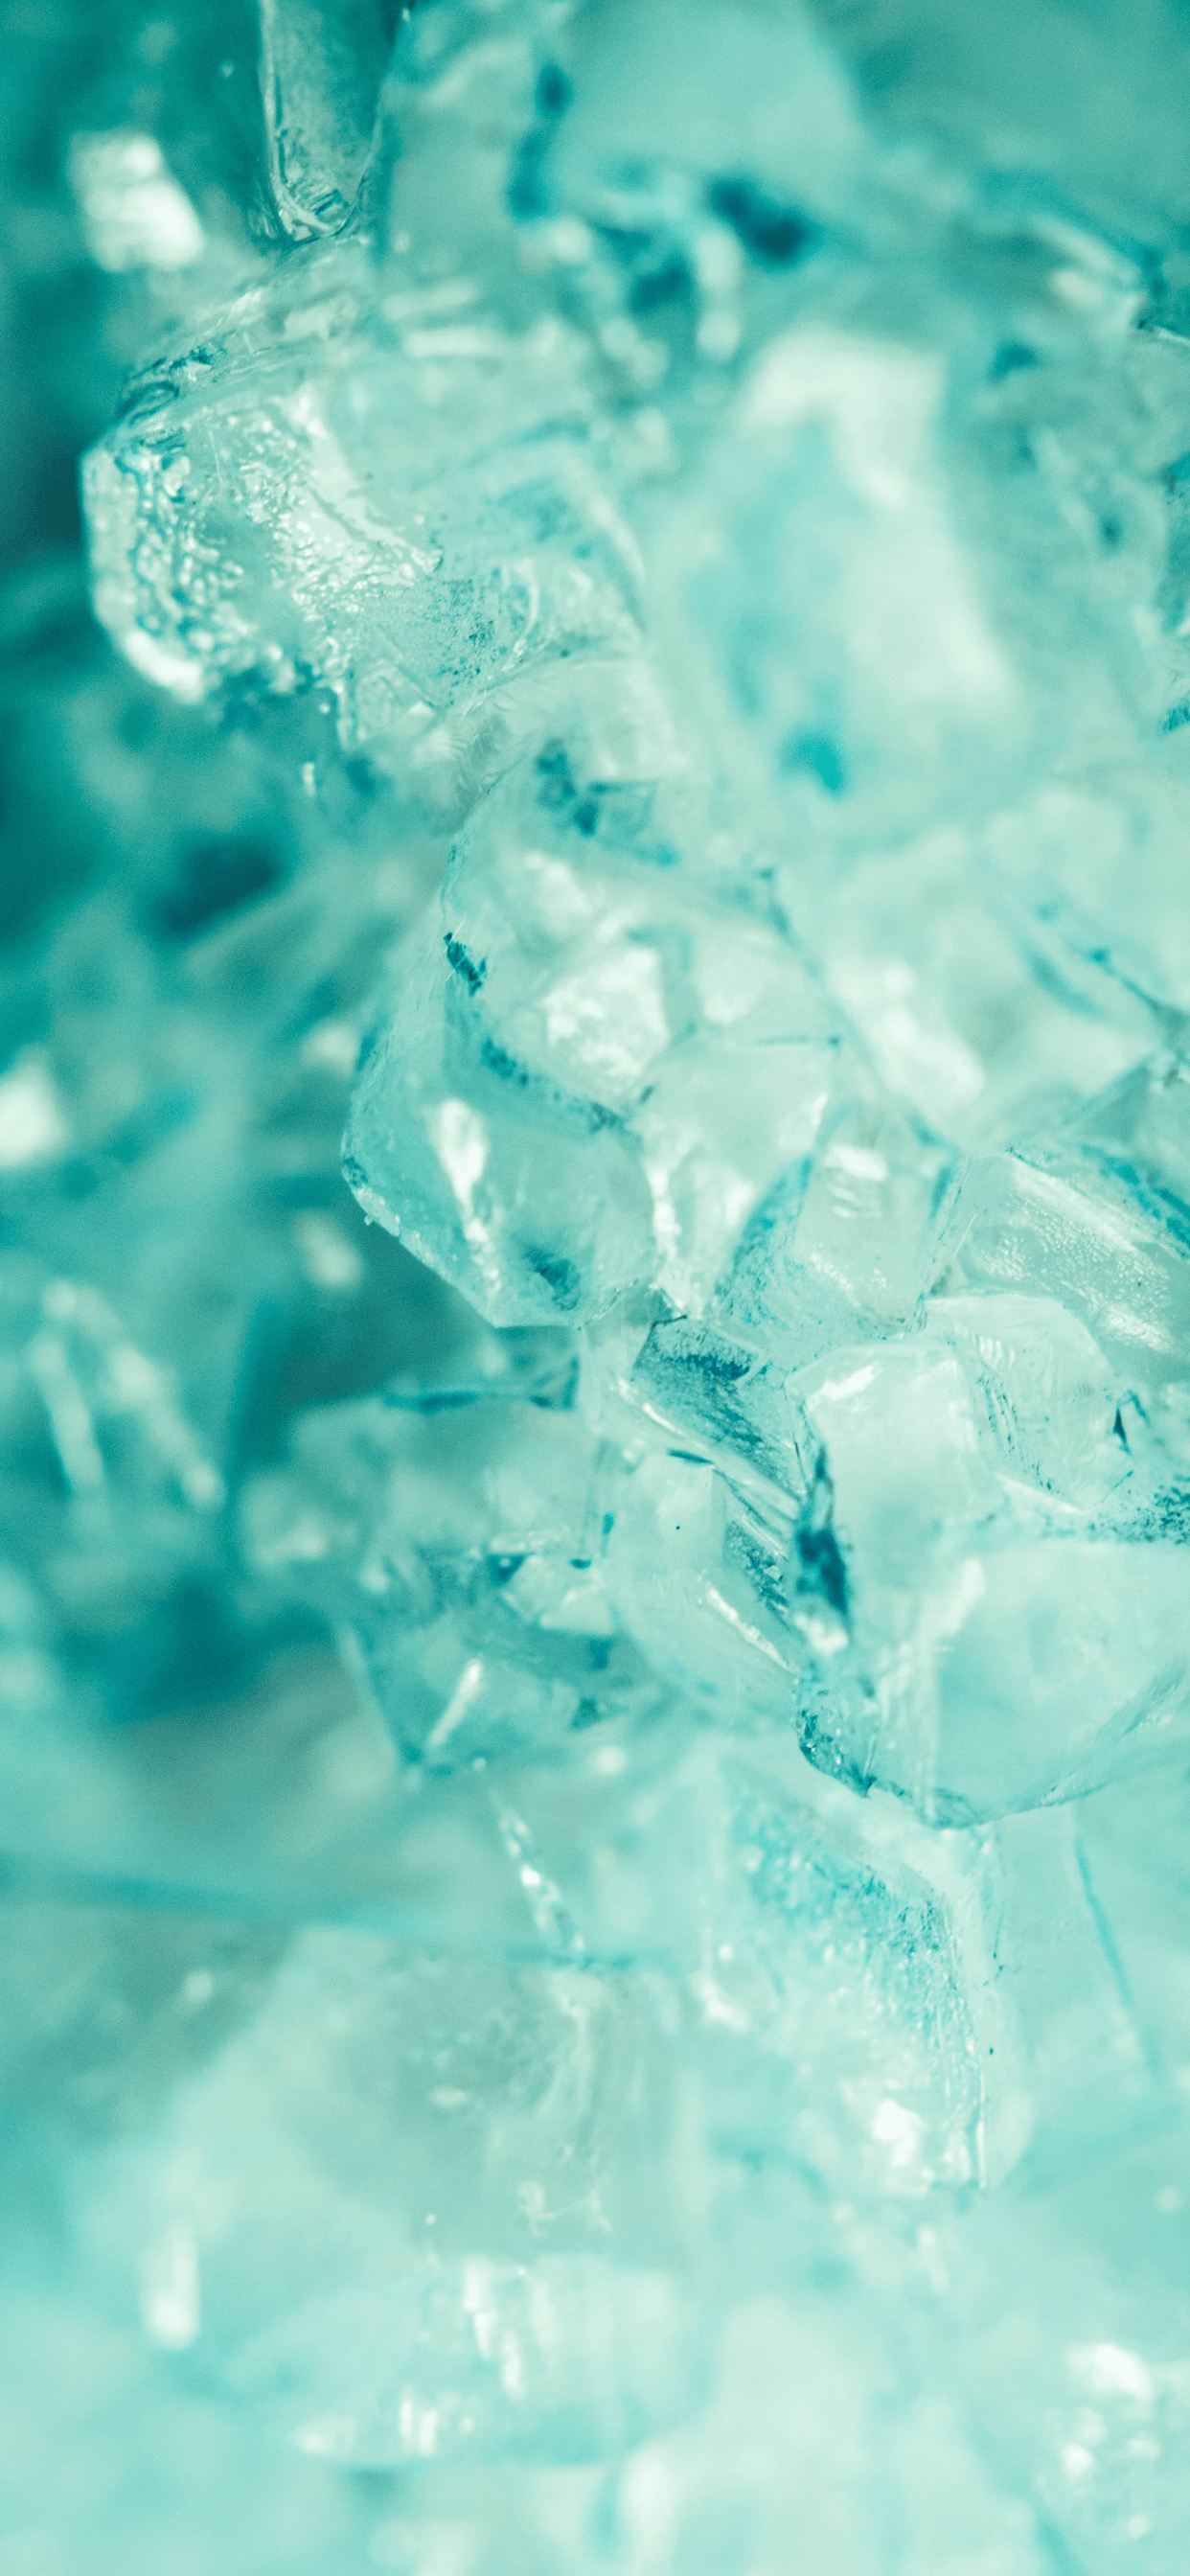 Crystal Wallpaper for iPhone Pro Max, X, 6